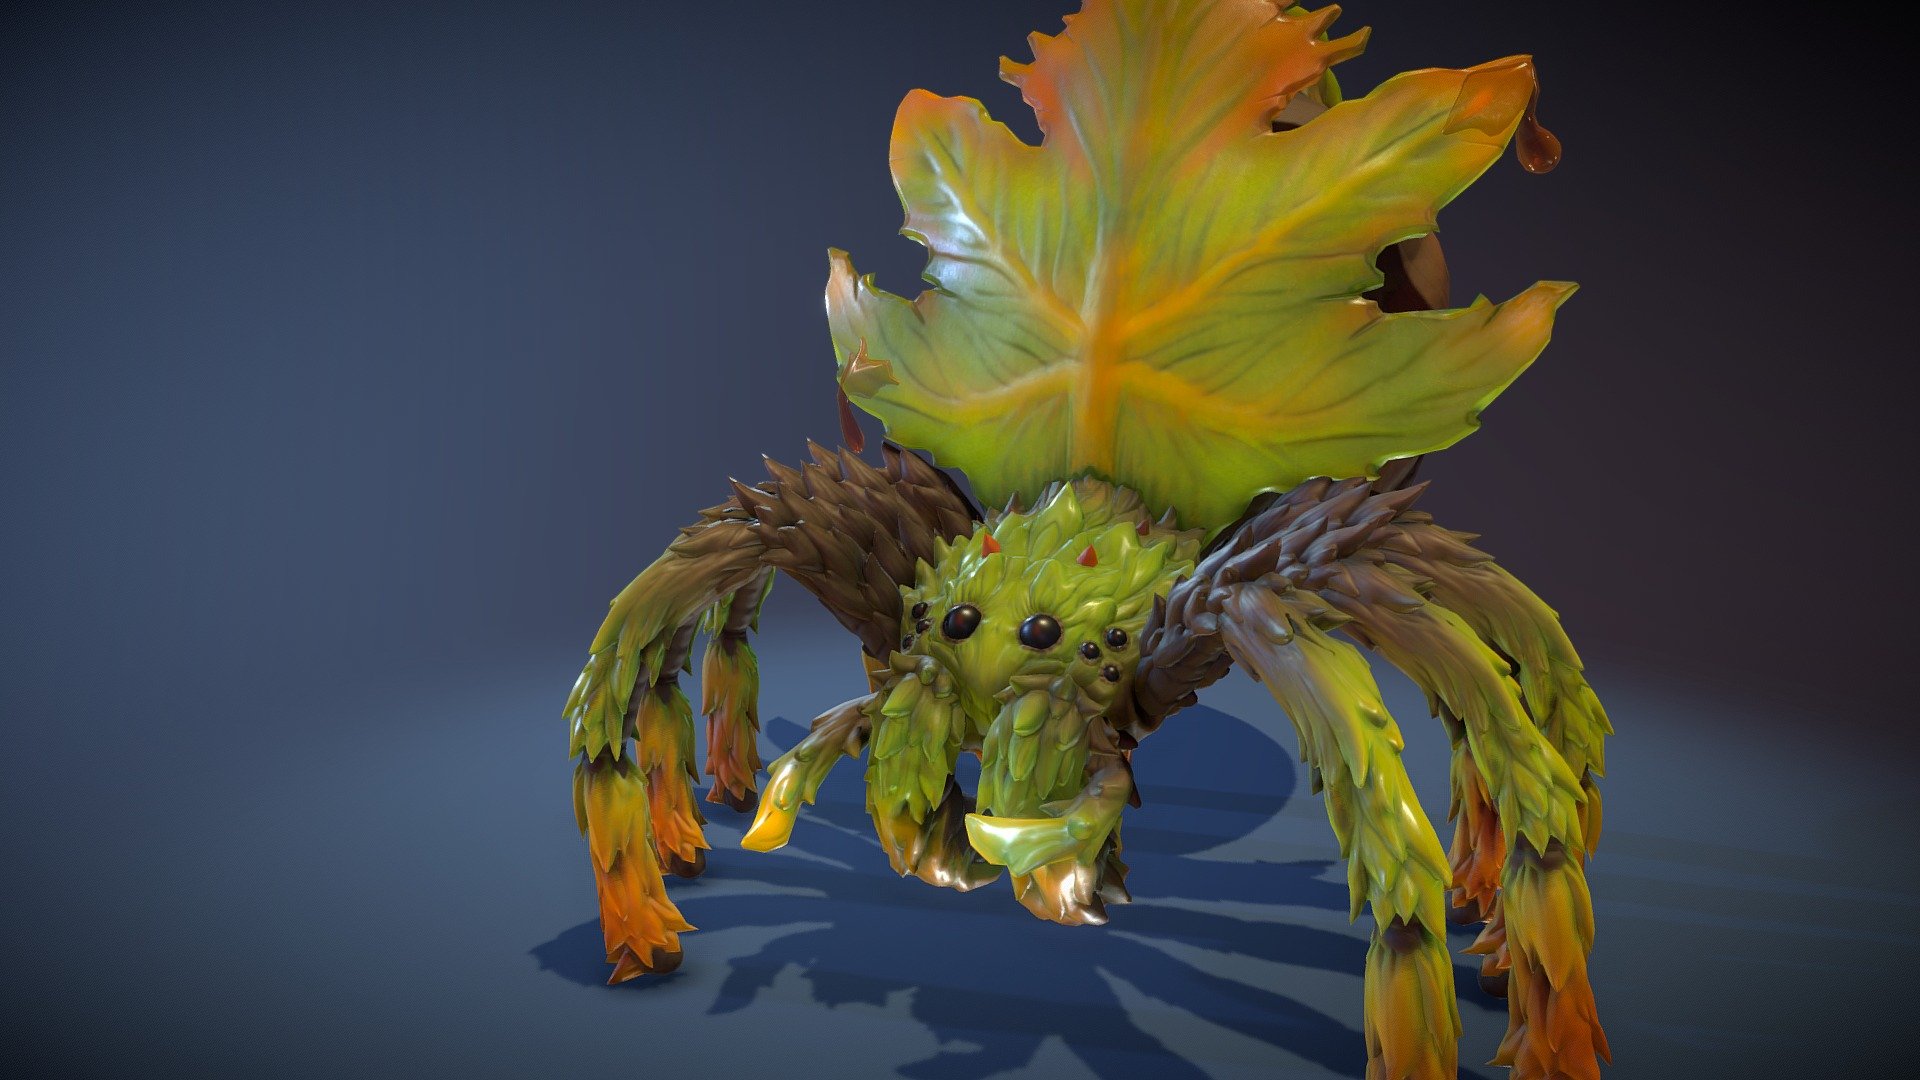 These spiders start growing a giant maple leaf on their back once they mature. This leaf constantly oozes with sticky sap that they throw at prey.

If anyways want to see more/wips follow my Twitter:
https://twitter.com/Pasco295/status/1008773313085177867

https://twitter.com/Pasco295/status/1008060076446437377 - Maple Leaf Spider - Animated - 3D model by pasco295 3d model